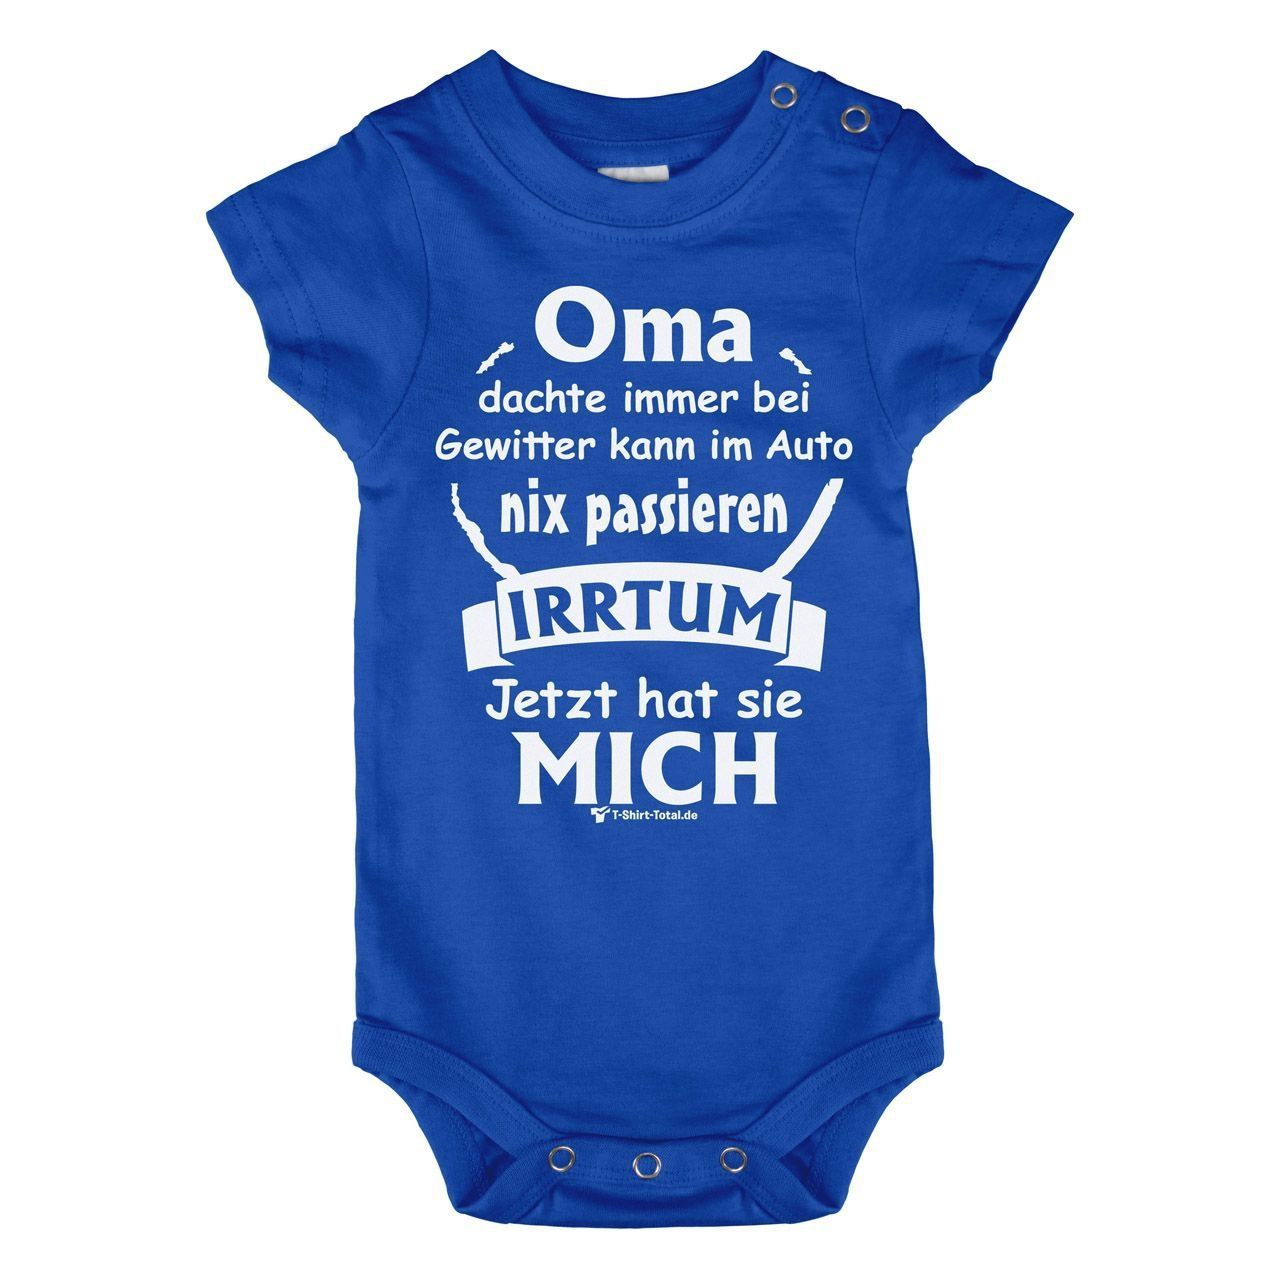 Oma dachte immer bei Gewitter Baby Body Kurzarm royal 56 / 62